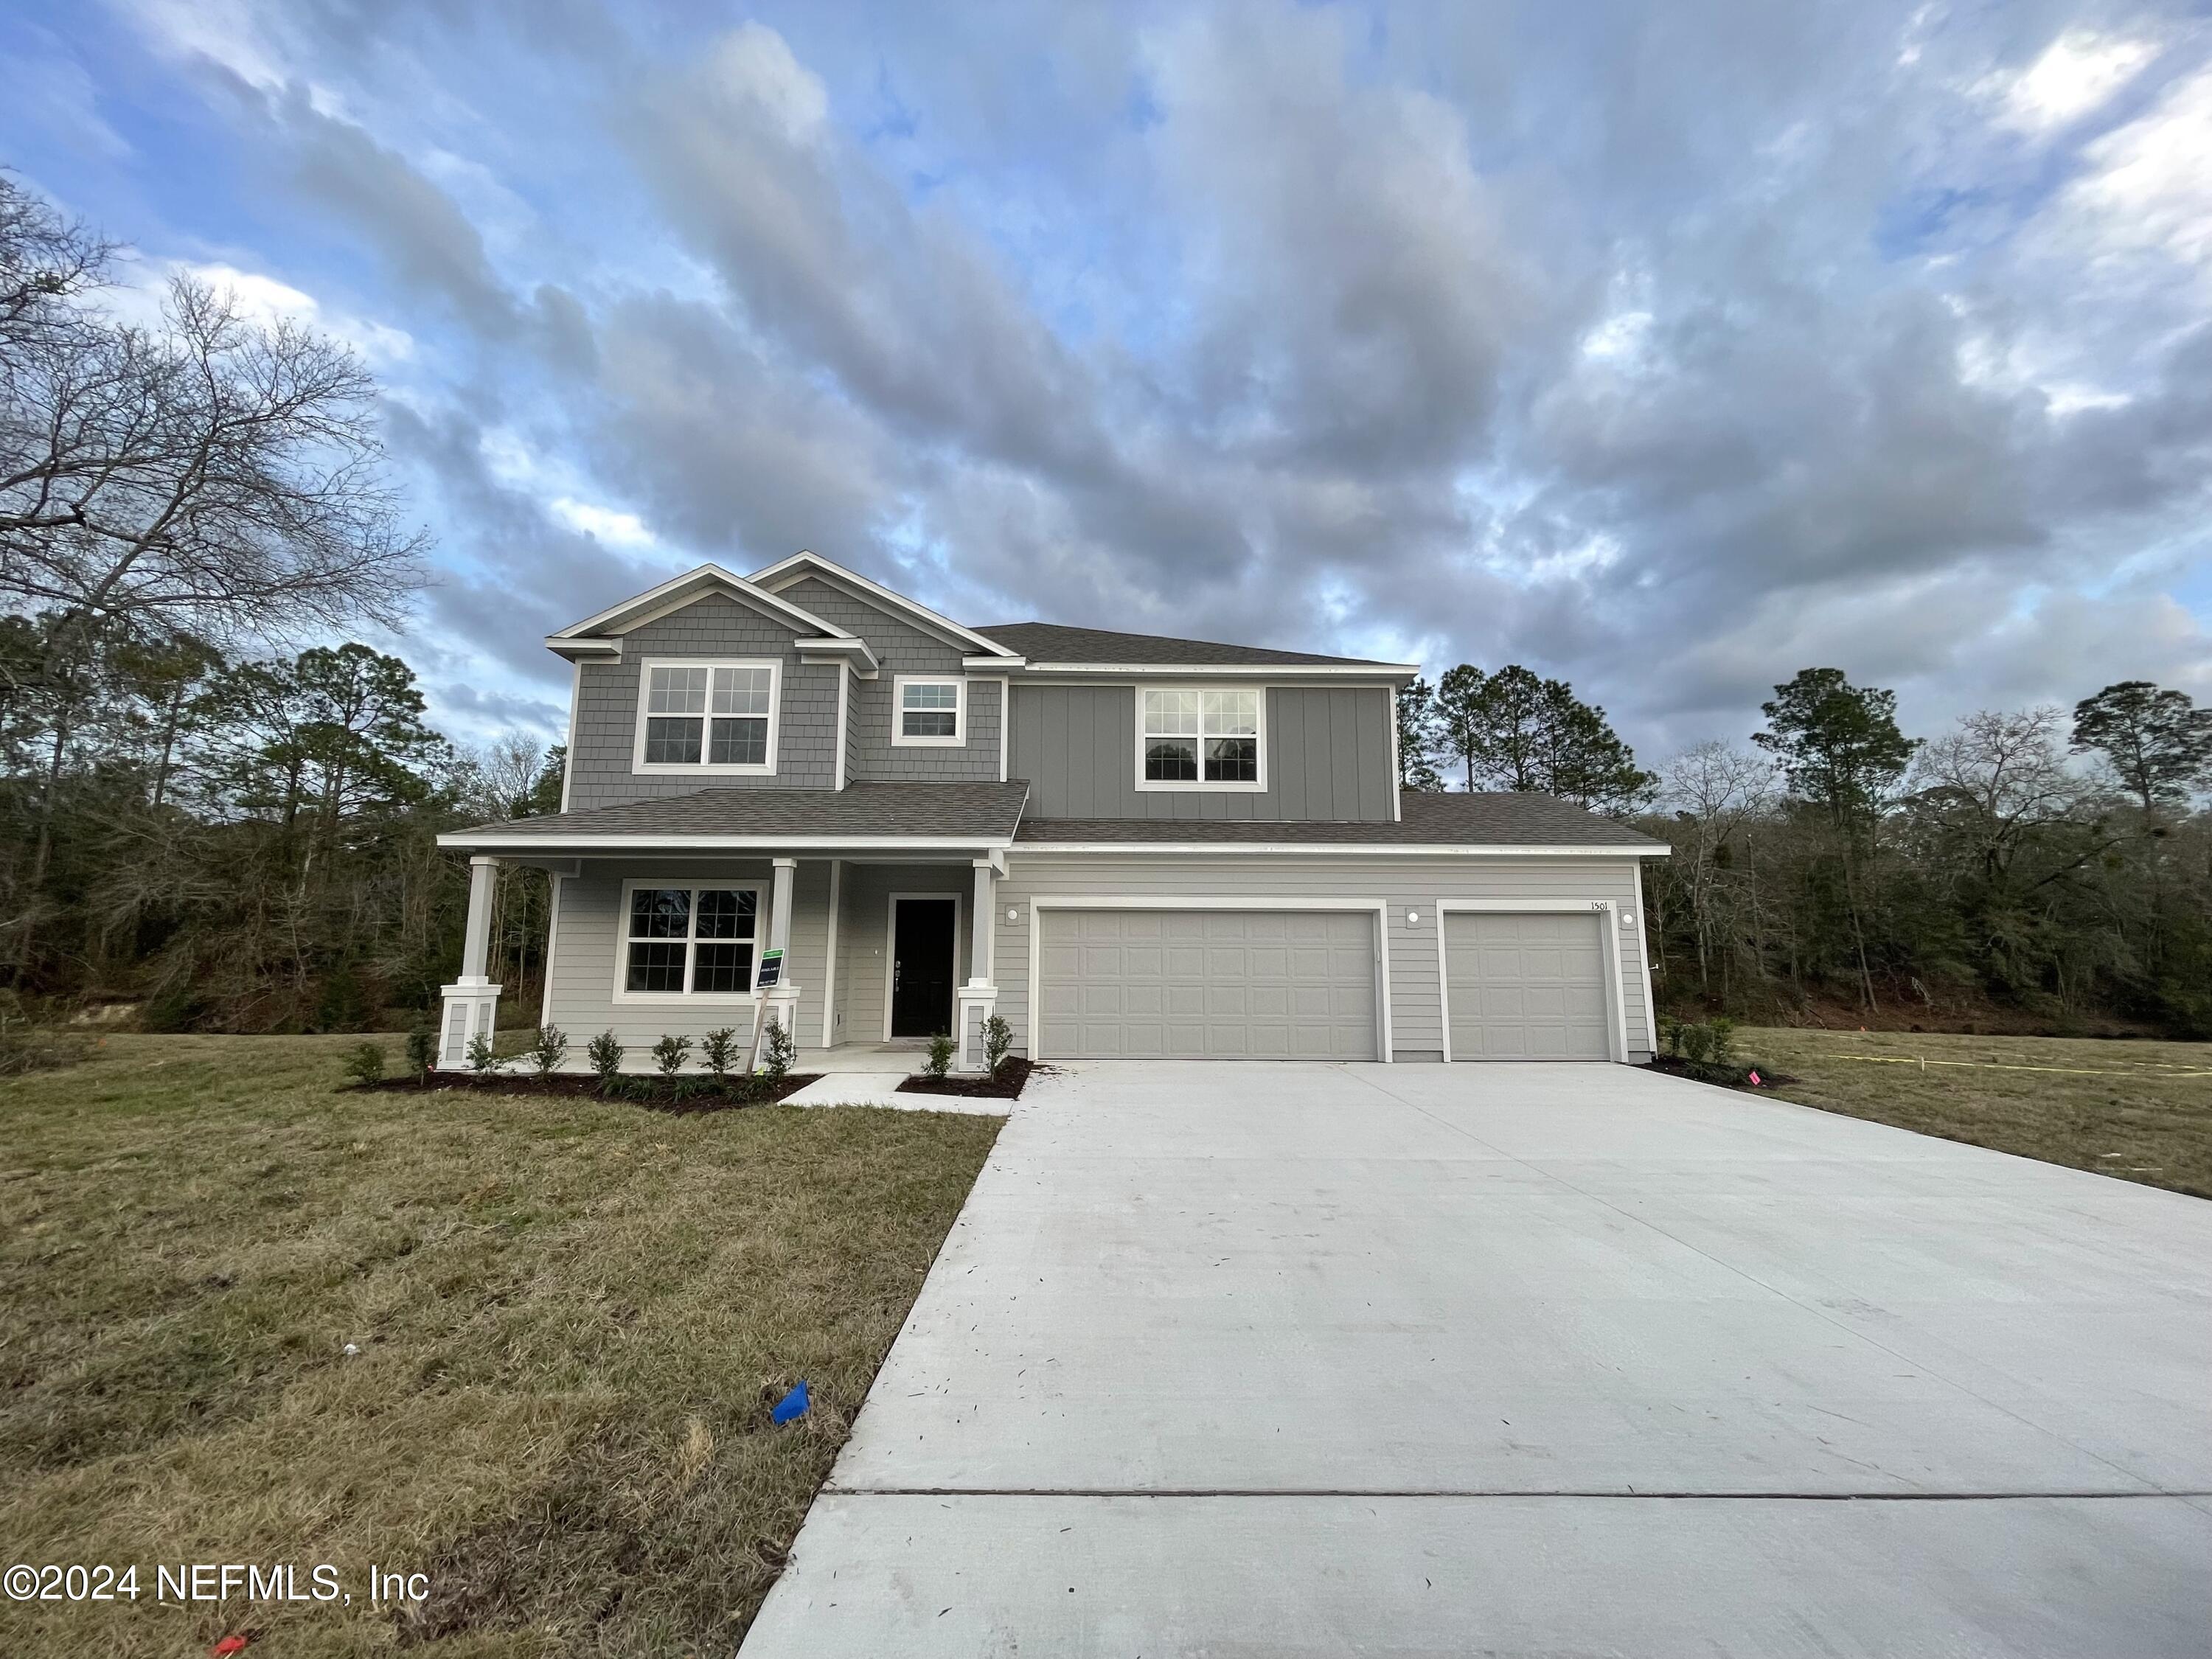 Middleburg, FL home for sale located at 1501 Lake Foxmeadow Rd, Middleburg, FL 32068